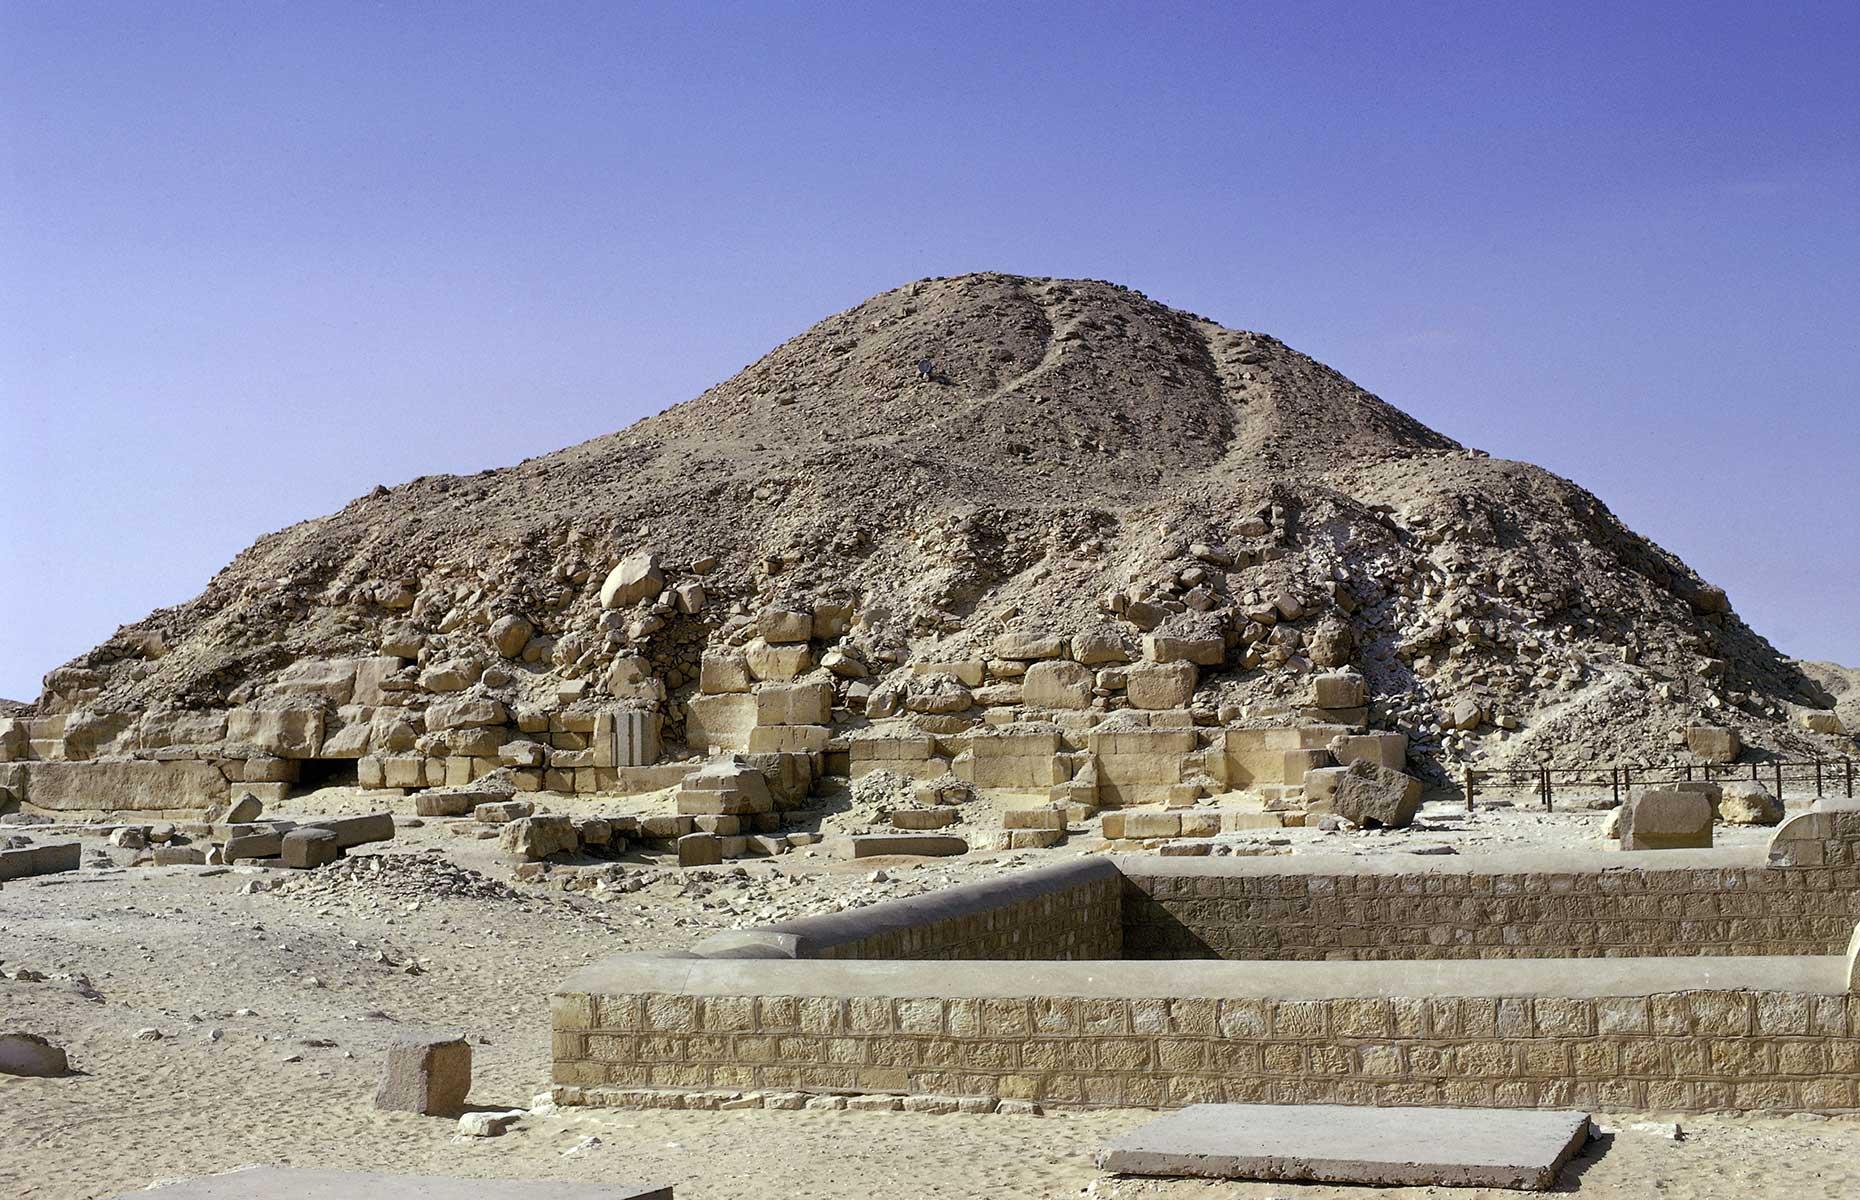 <p>King Unas (2465-2325 BC) ruled during the Fifth Dynasty, and his pyramid at Saqqara was once 141 feet (43m) tall, but it fell into decay after his death and later Egyptian kings <a href="https://egymonuments.gov.eg/en/monuments/pyramid-of-unas">removed and reused most of the stones</a>. The pyramid has long been in a sorry state, but you can still see an inscription left by Prince Khaemwaset, the son of Ramesses II and High Priest of Ptah in Memphis, <a href="http://www.ancient-egypt.org/history/old-kingdom/5th-dynasty/unas/pyramid-complex-of-unas/pyramid-of-unas.html">who restored the monument</a> in the 13th century BC.</p>